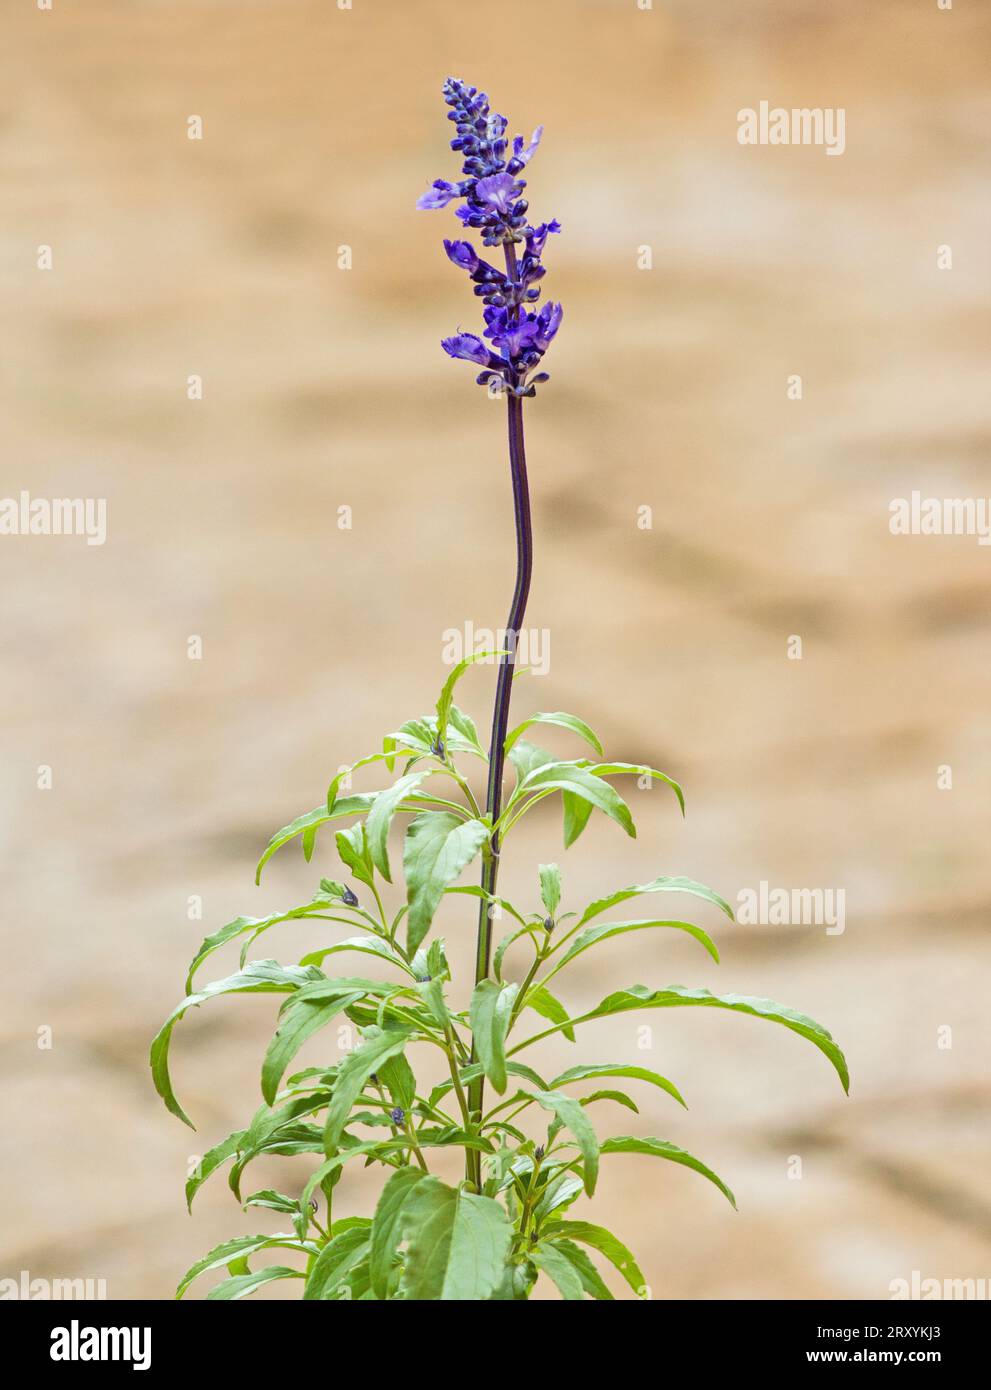 Mealycup sage, Salvia farinacea, Mexican sage on neutral background Stock Photo